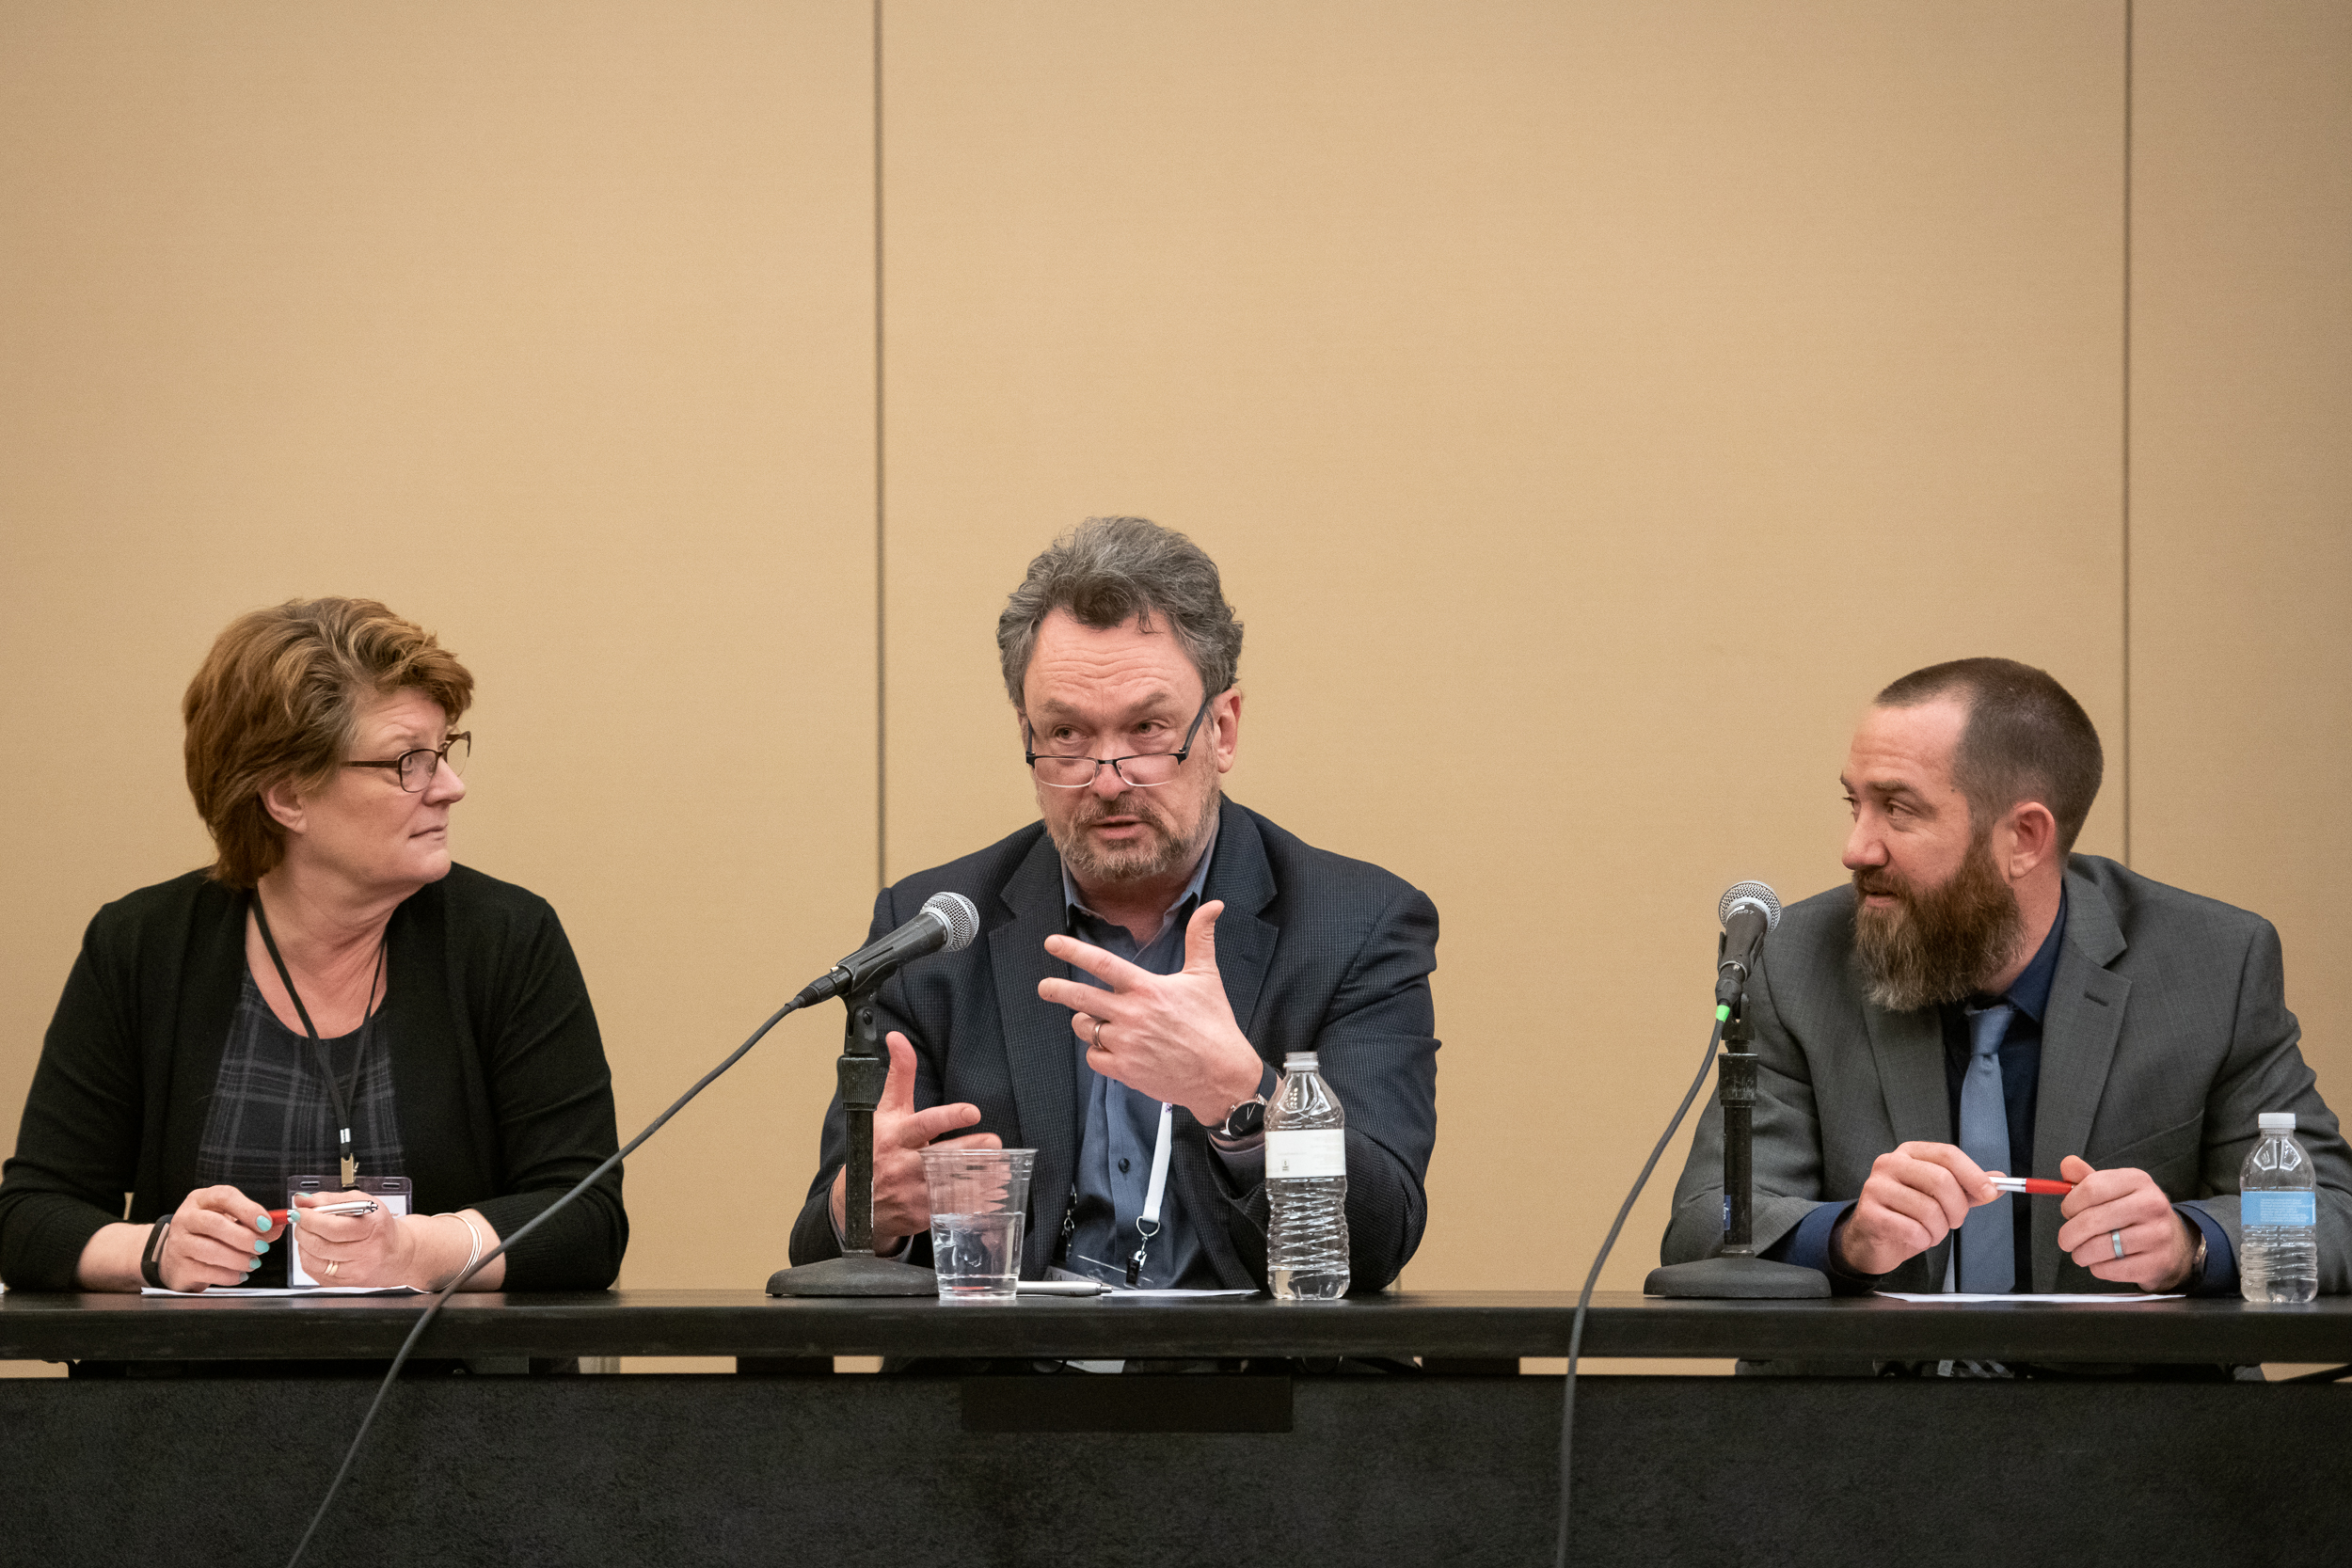 2019 Delphi Award Winners Discuss Supporting Non-Tenure Track Faculty at AAC&U Conference